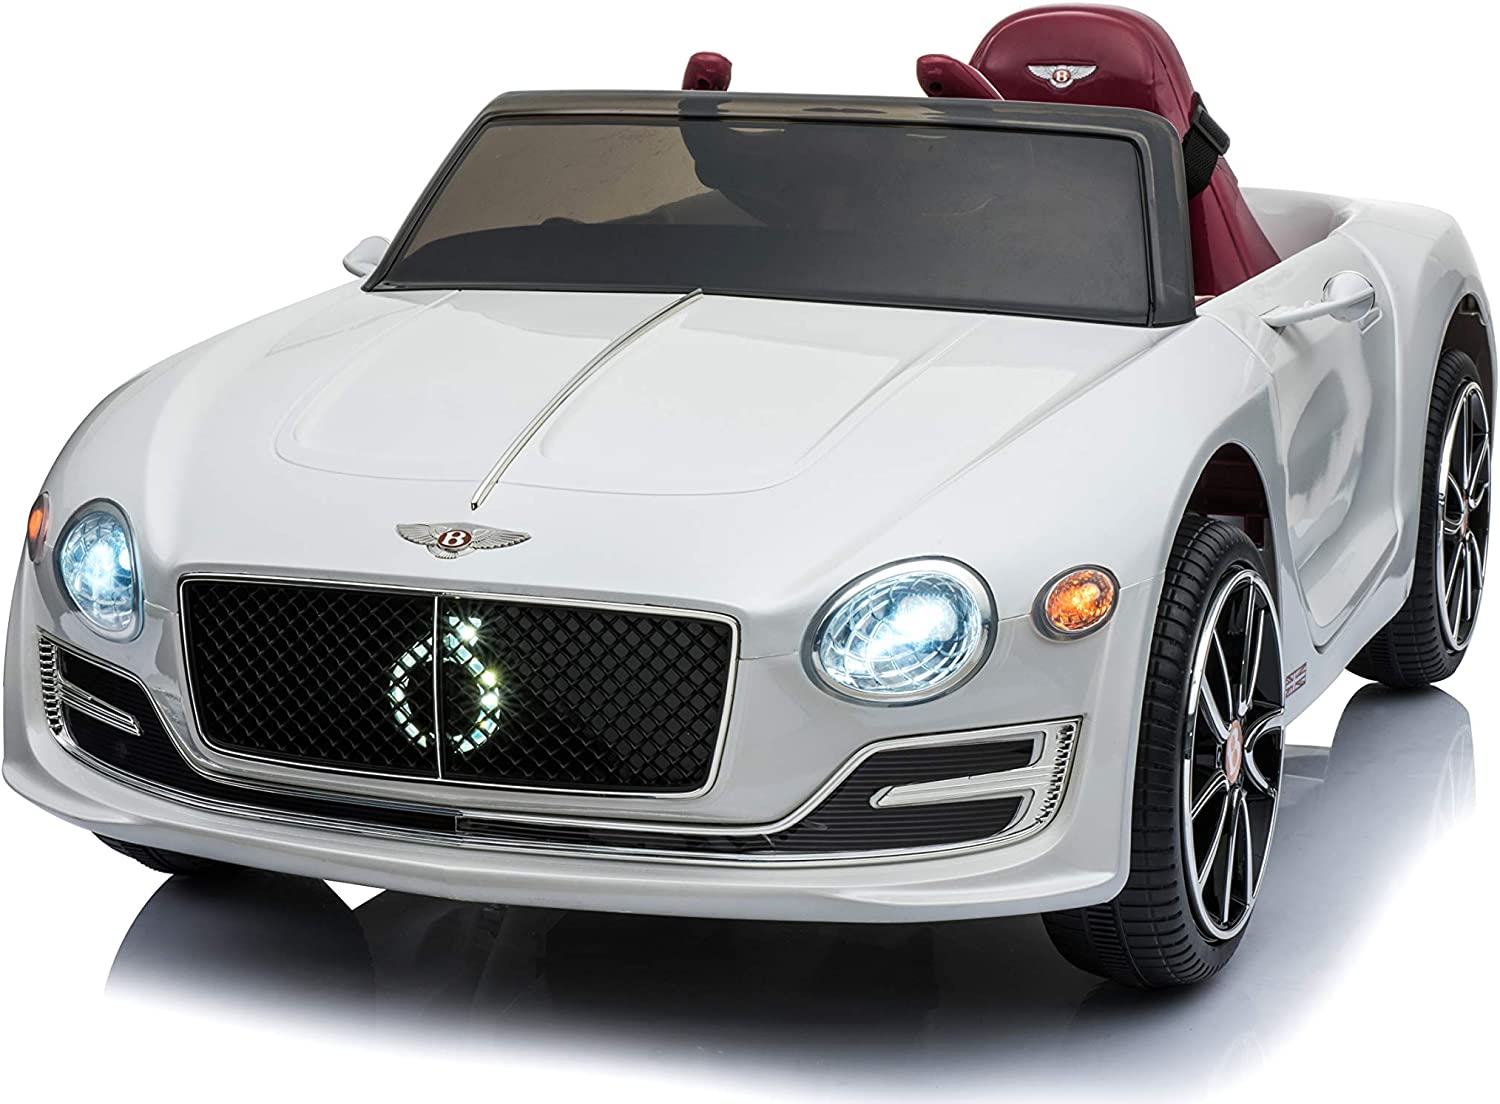 White Bentley GT EXP12 electric ride-on car for kids, featuring black wheels and a red seat.